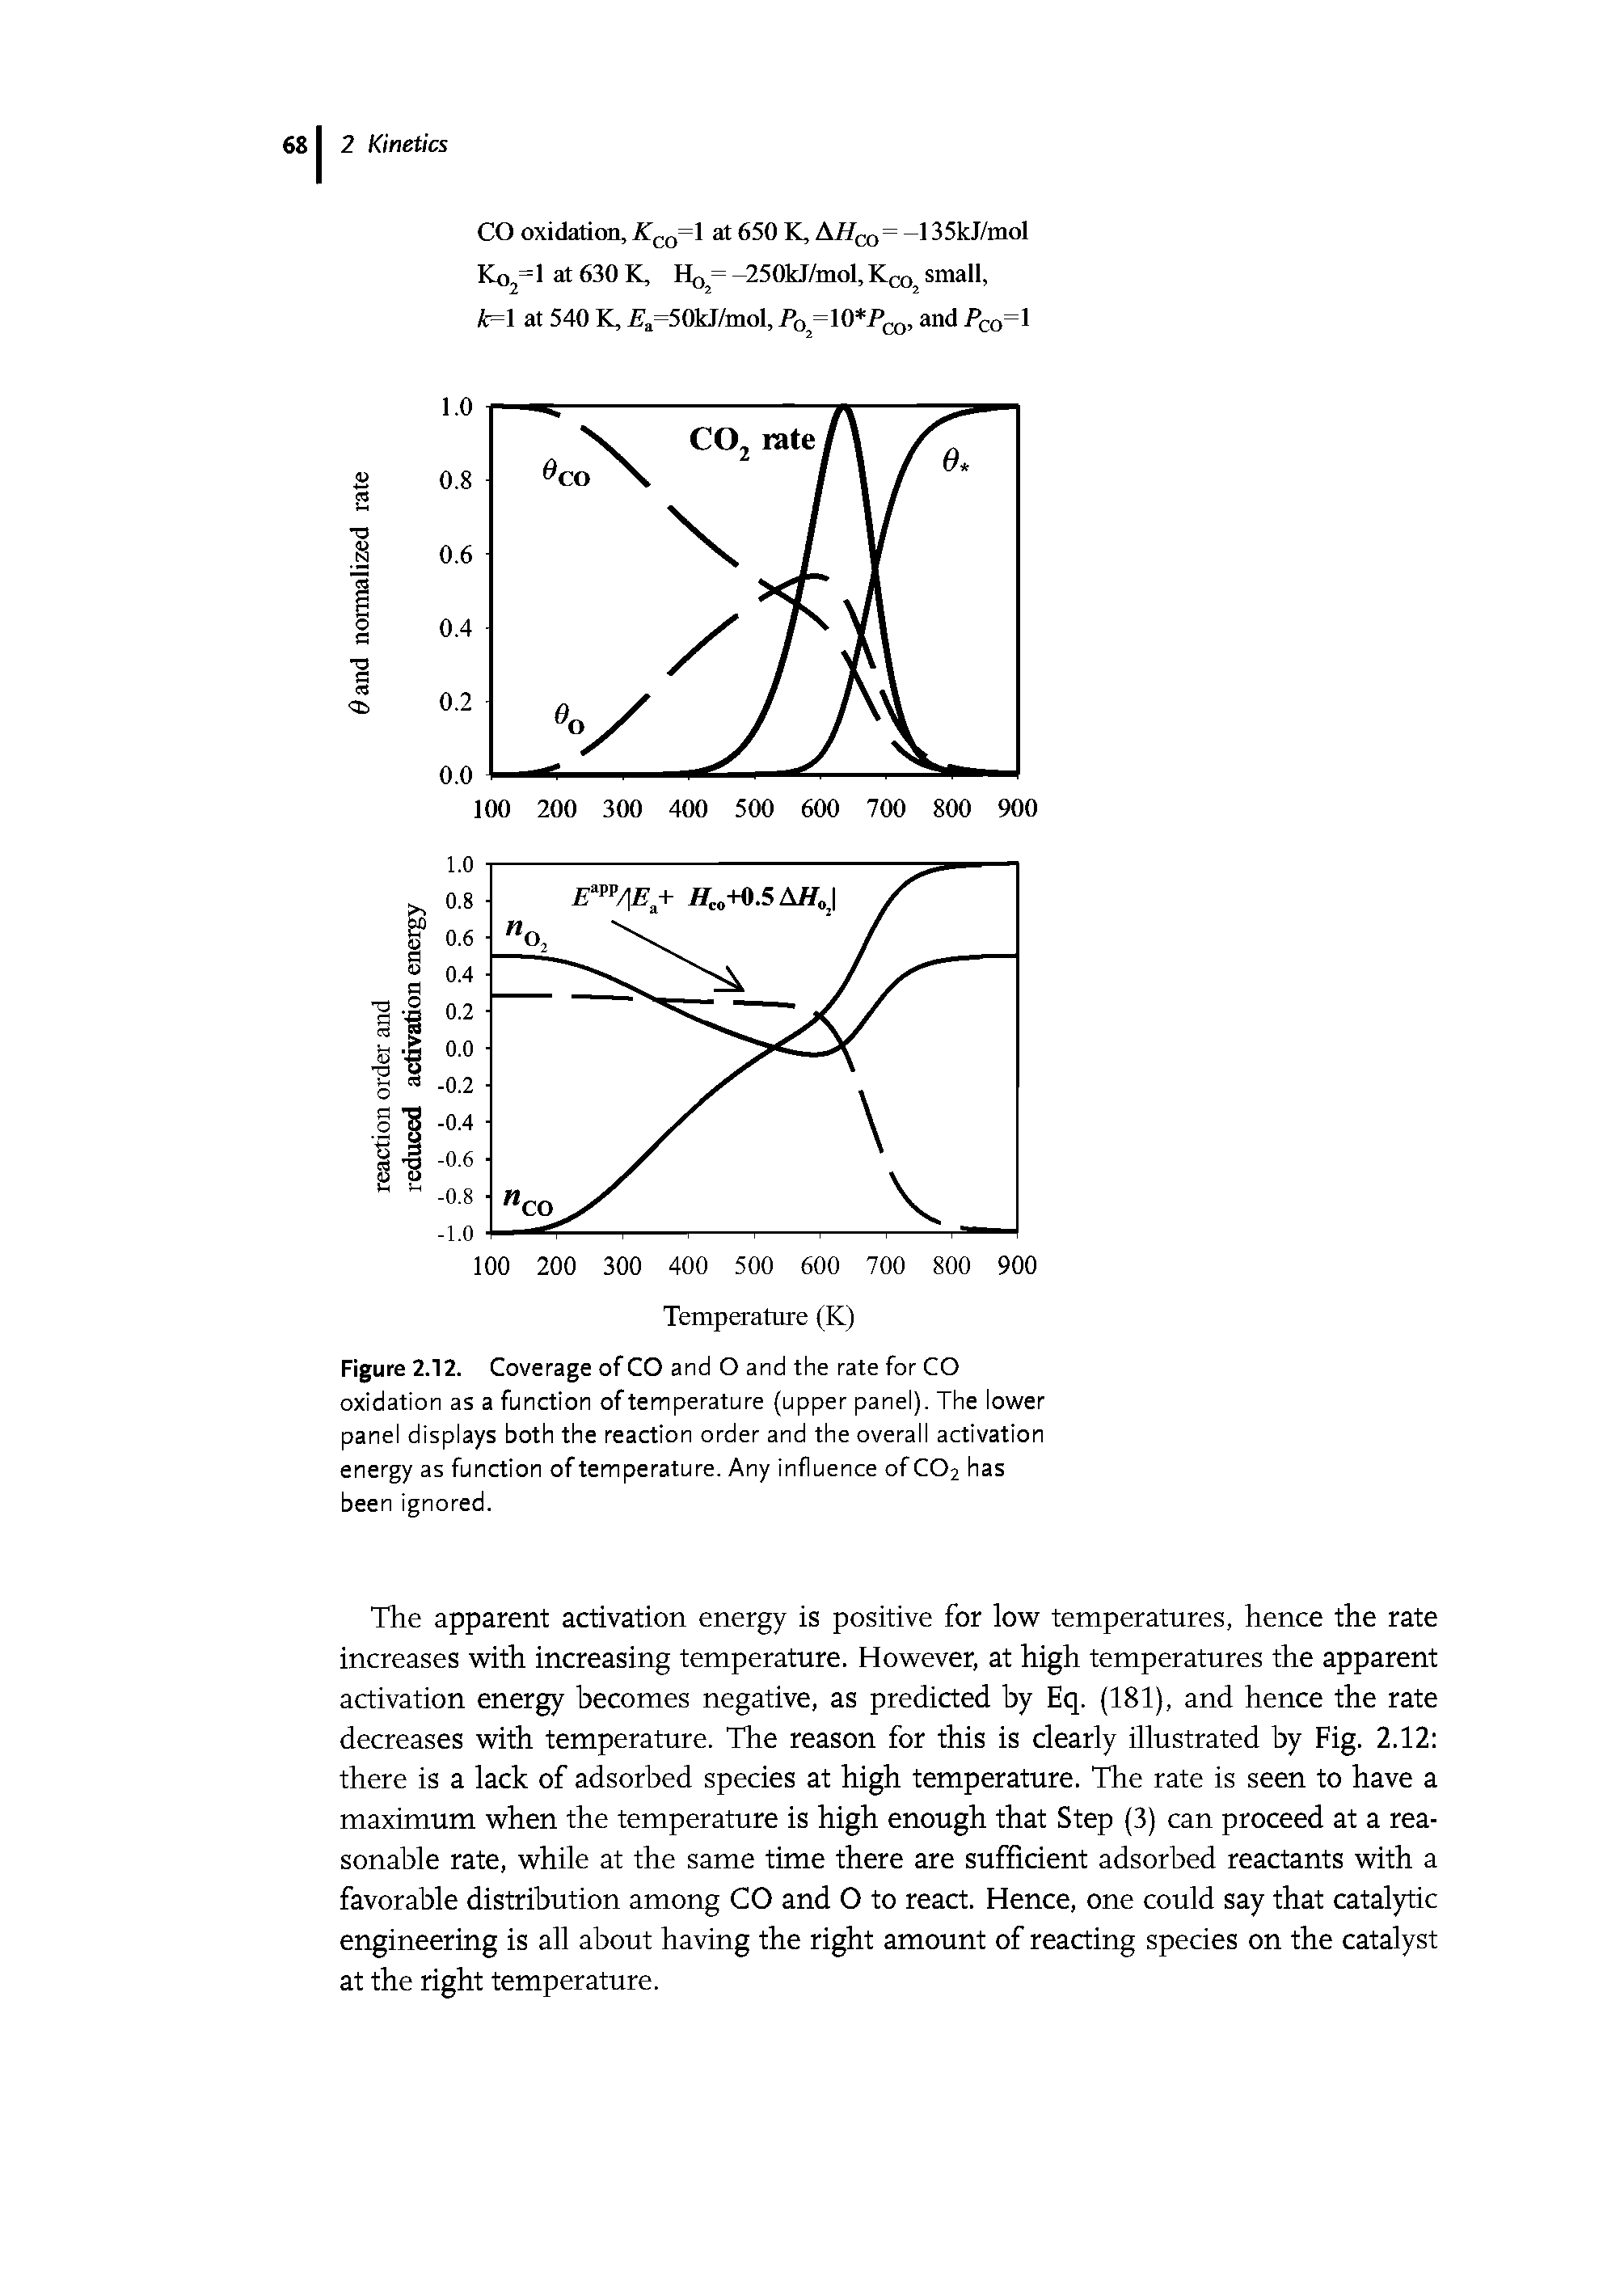 Figure 2.12. Coverage of CO and O and the rate for CO oxidation as a function of temperature (upper panel). The lower panel displays both the reaction order and the overall activation energy as function of temperature. Any influence of CO2 has been ignored.